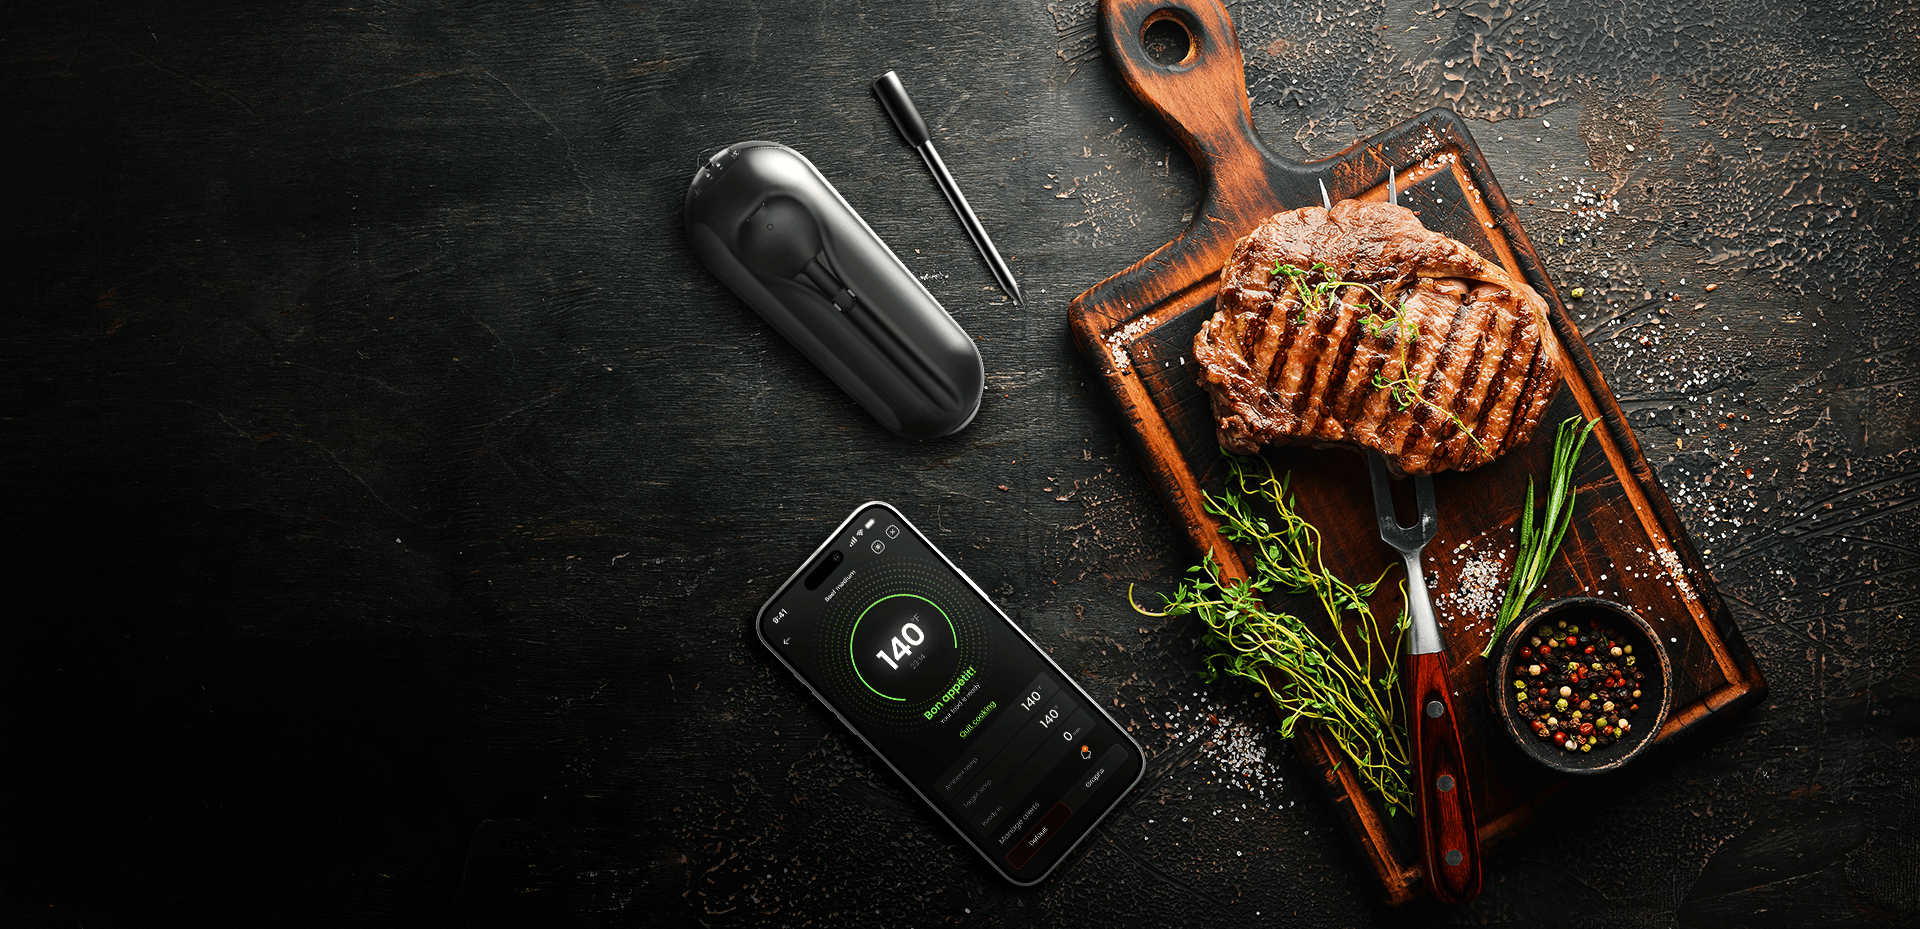 Meat it 3 wireless meat thermometer